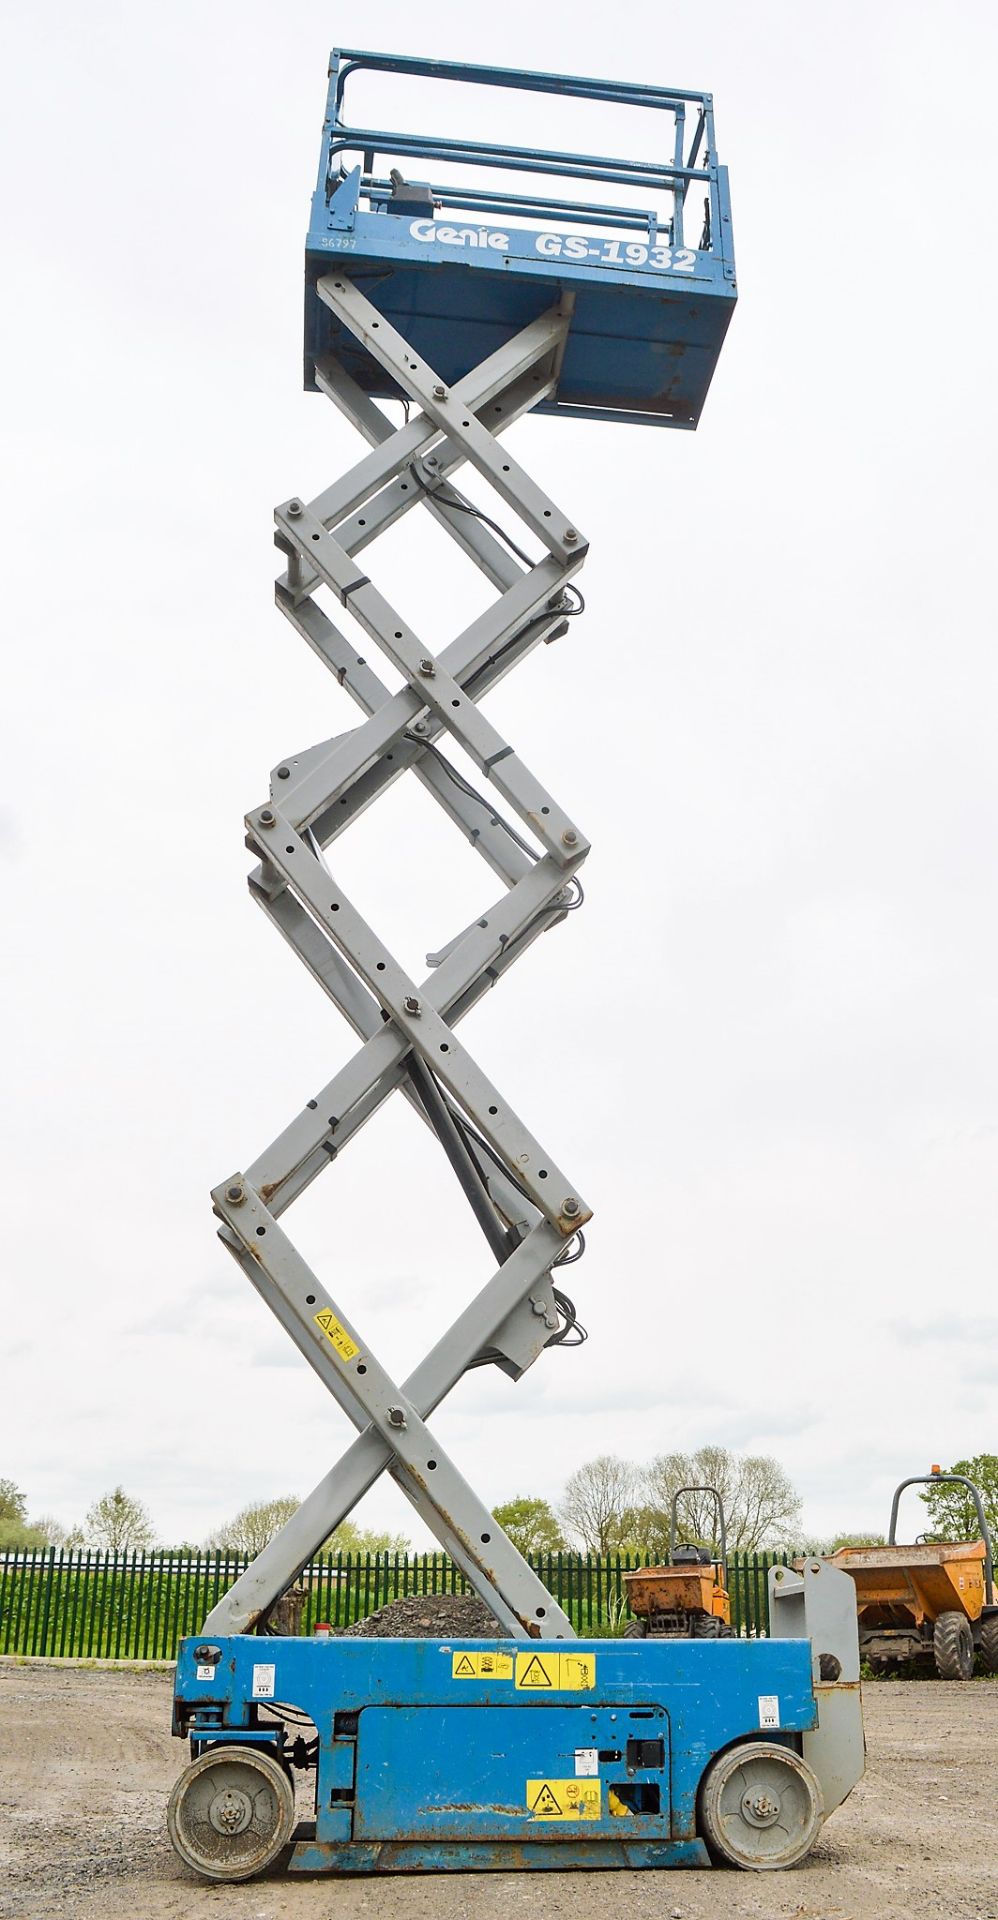 Genie GS1932 19ft battery electric scissor lift access platform Year: 2008 S/N: C286 Recorded Hours: - Image 4 of 4